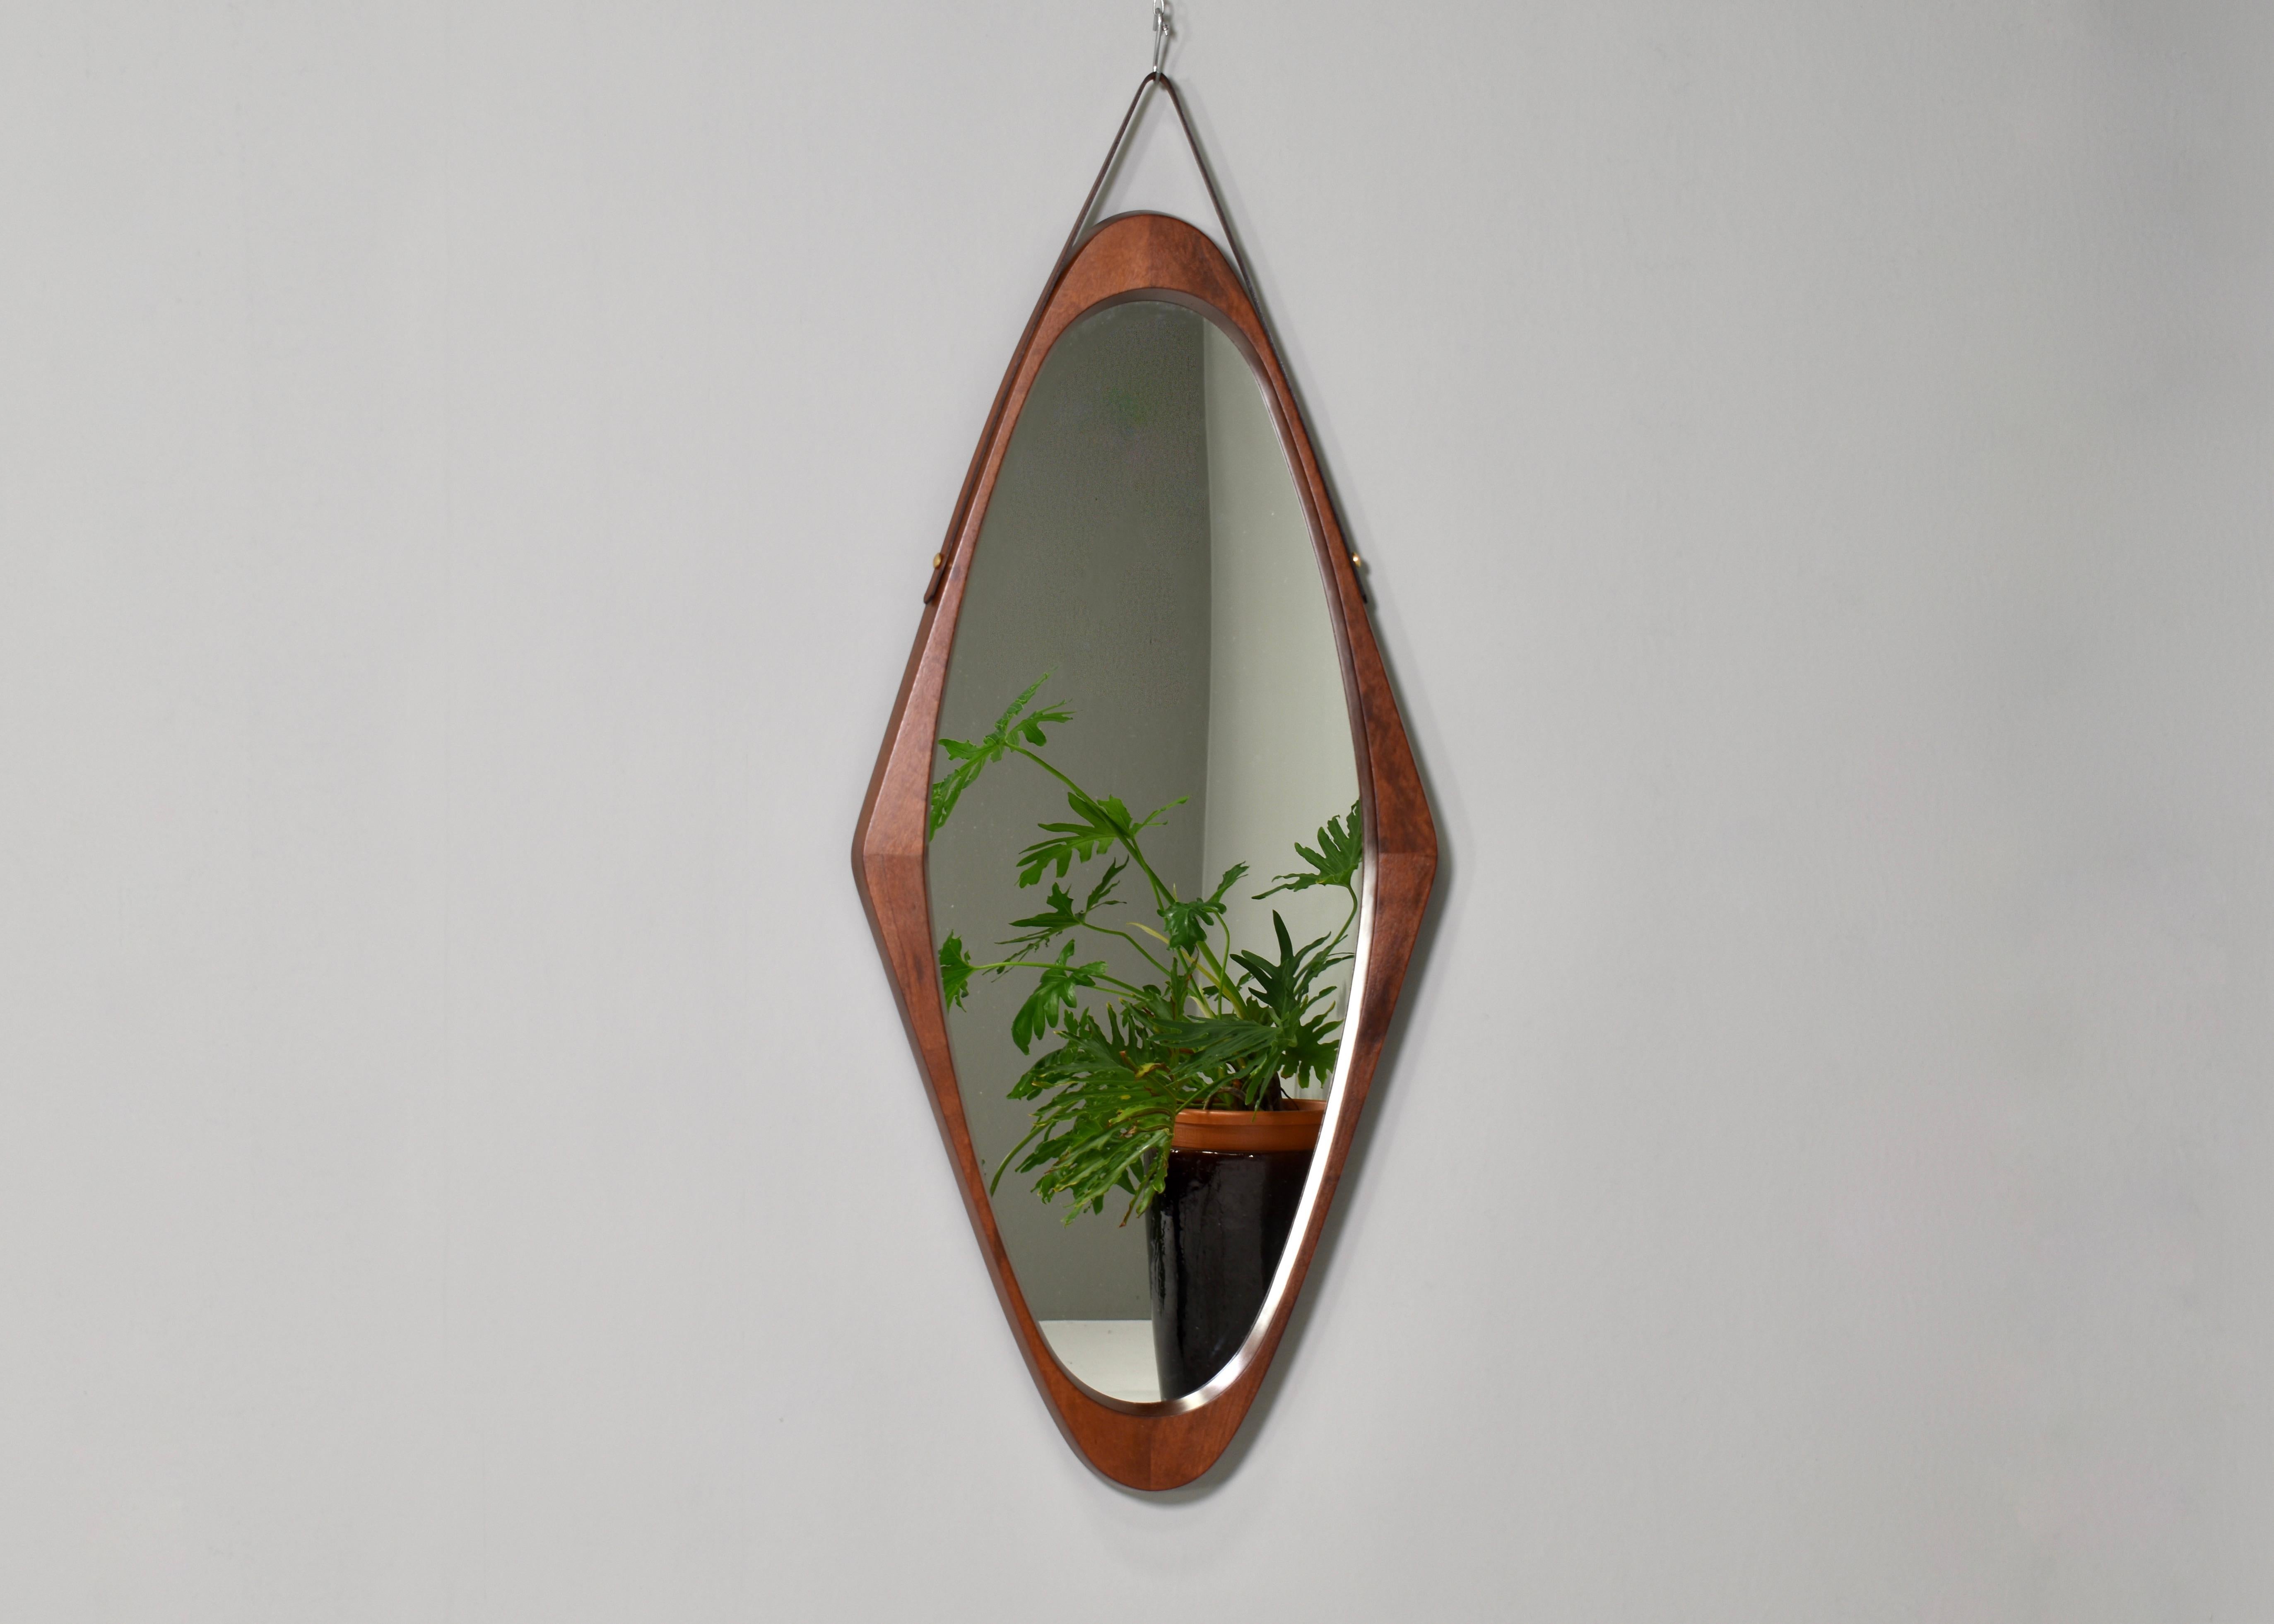 Elegant 1950’s mirror in solid teak. It features a leather strap and brass details. In excellent condition.
Designer: Unknown
Manufacturer: Unknown
Country: Italy
Model: Wall mirror
Design period: 1950’s
Date of manufacturing: circa 1950
Size wdh in